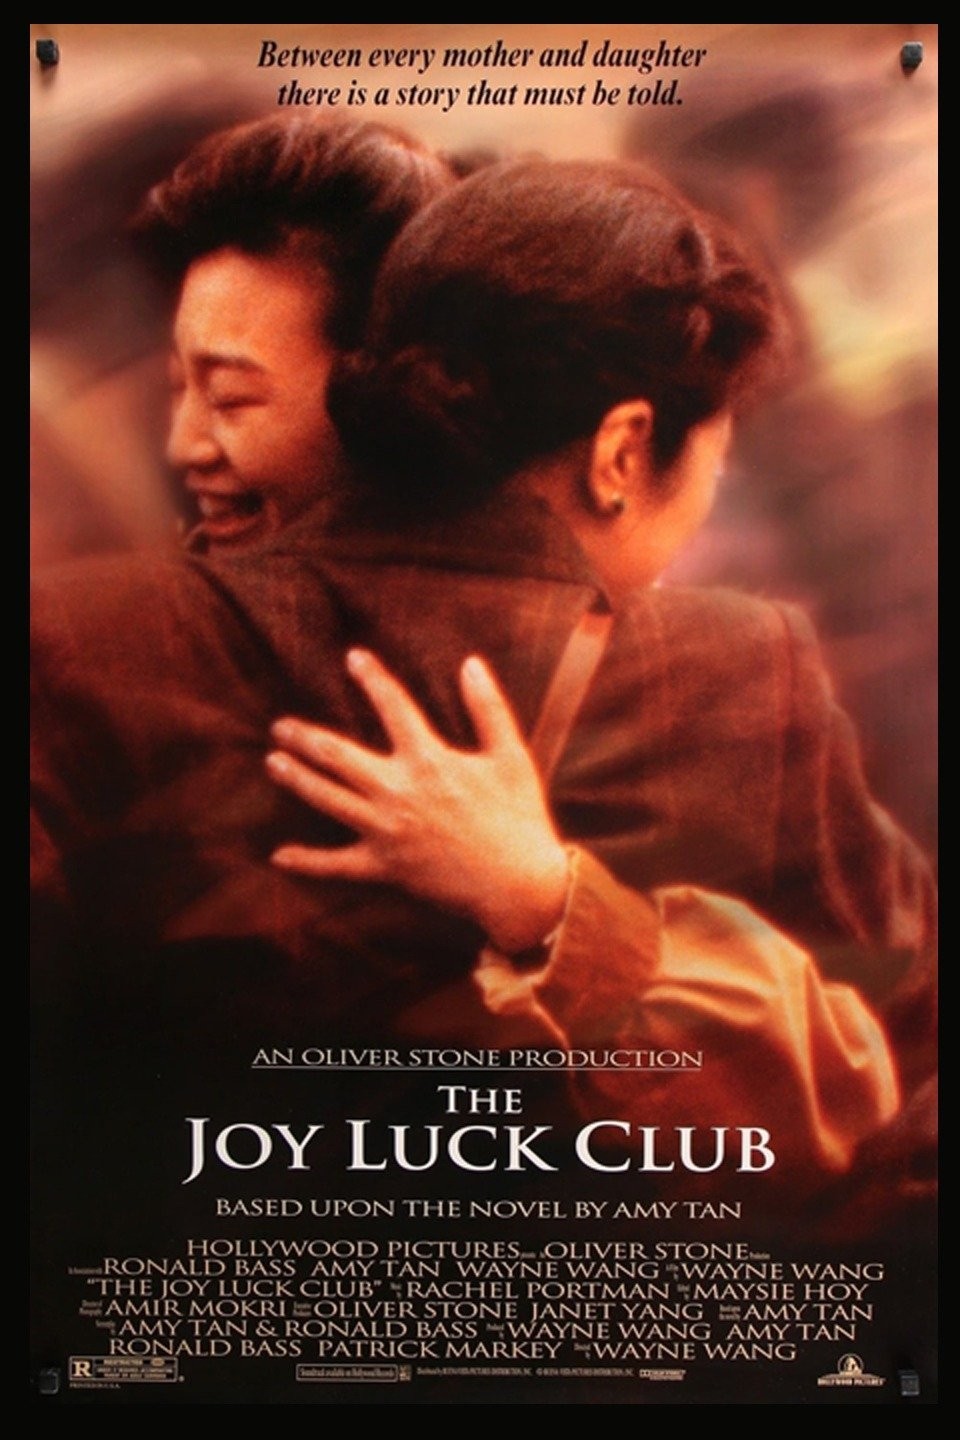 The Joy Luck Club - Rotten Tomatoes